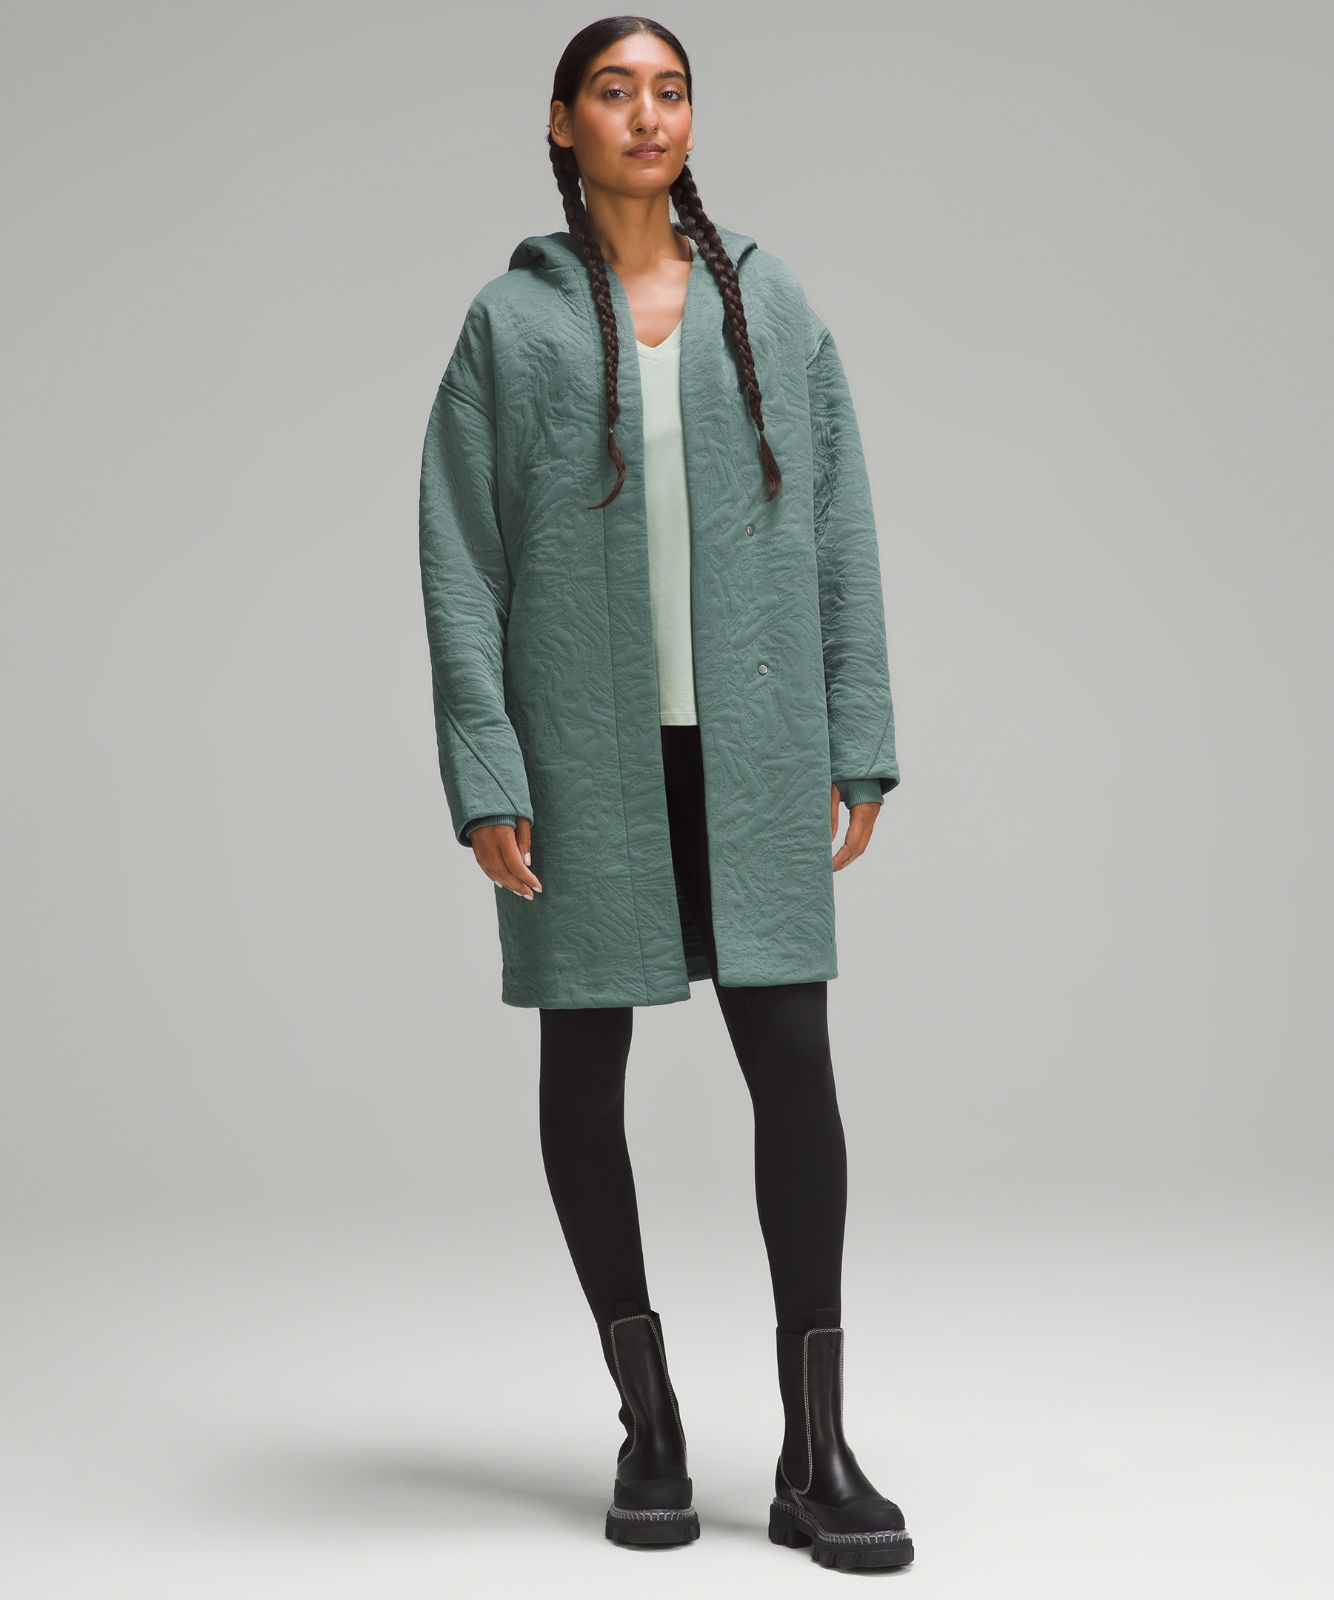 Packable Jacquard Knit Wrap, Coats and Jackets